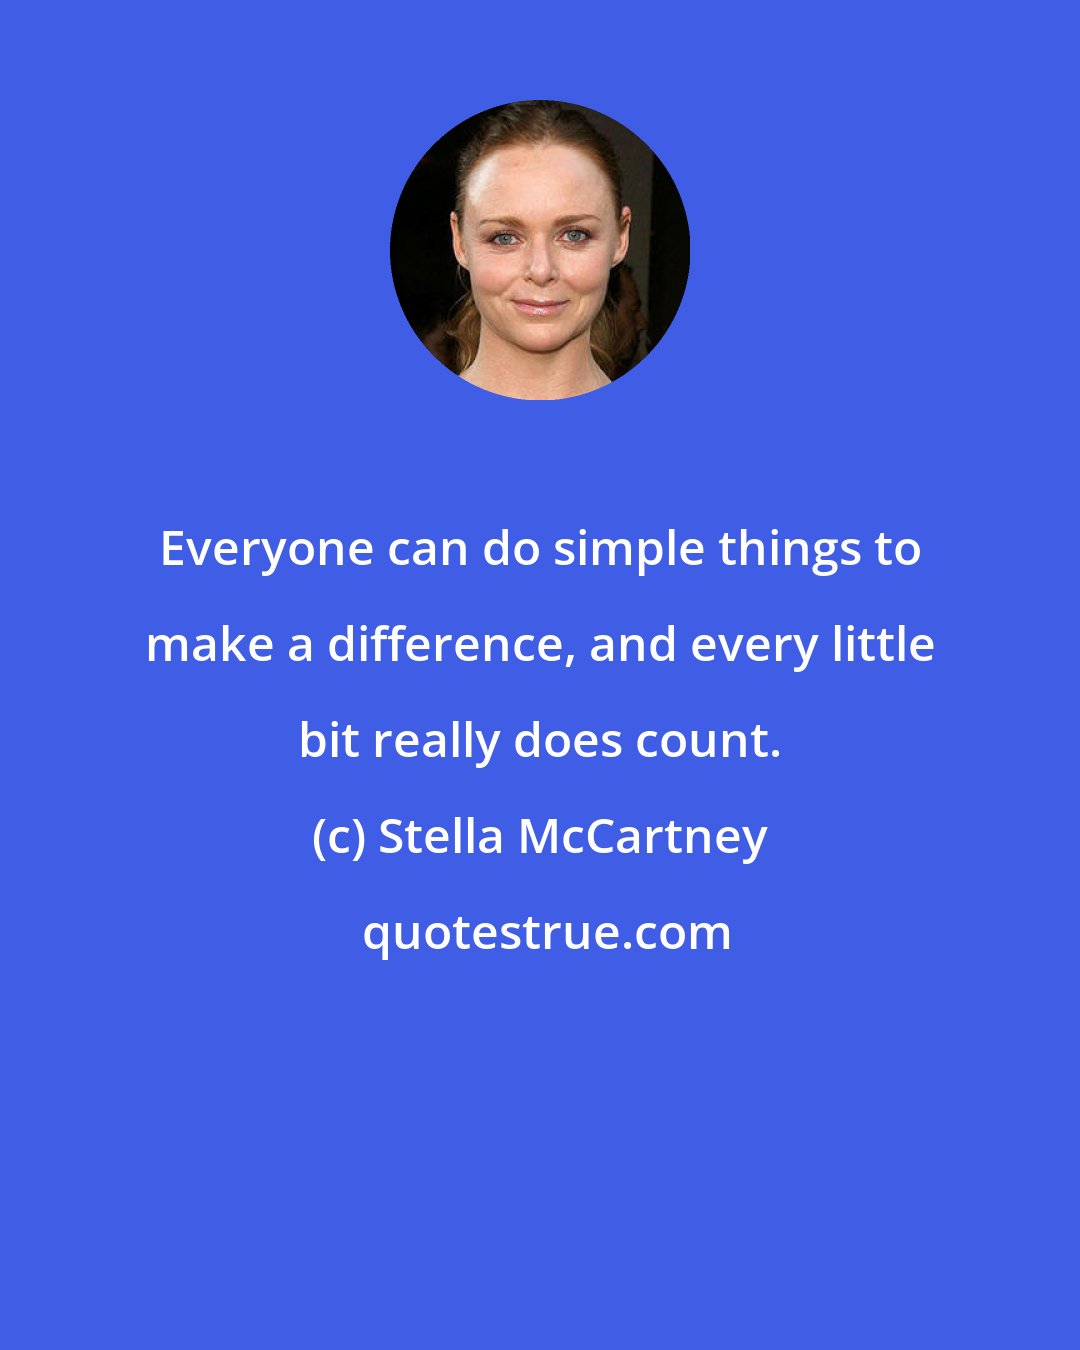 Stella McCartney: Everyone can do simple things to make a difference, and every little bit really does count.